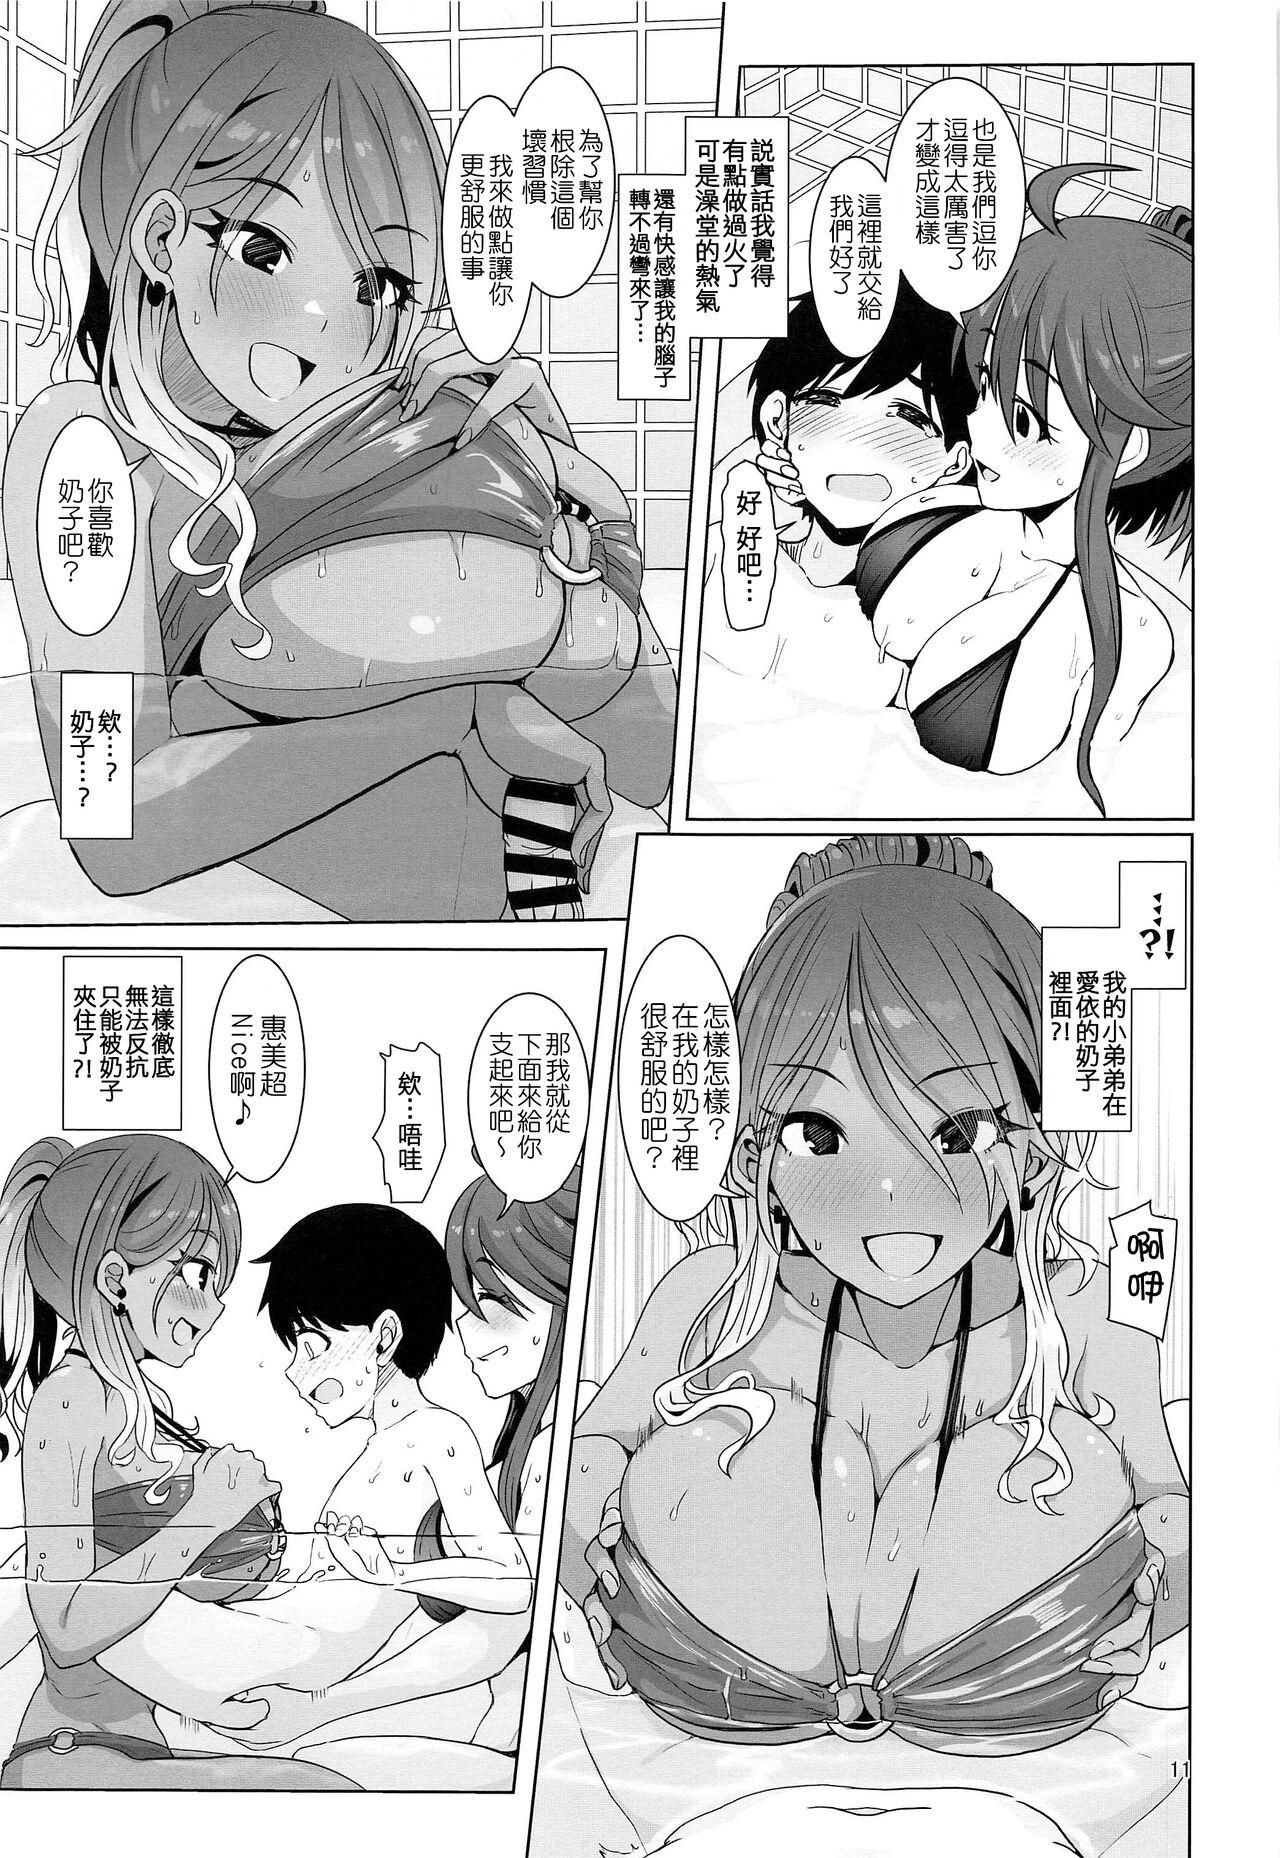 Exgirlfriend May You Make Me Happy? - The idolmaster Jeans - Page 13